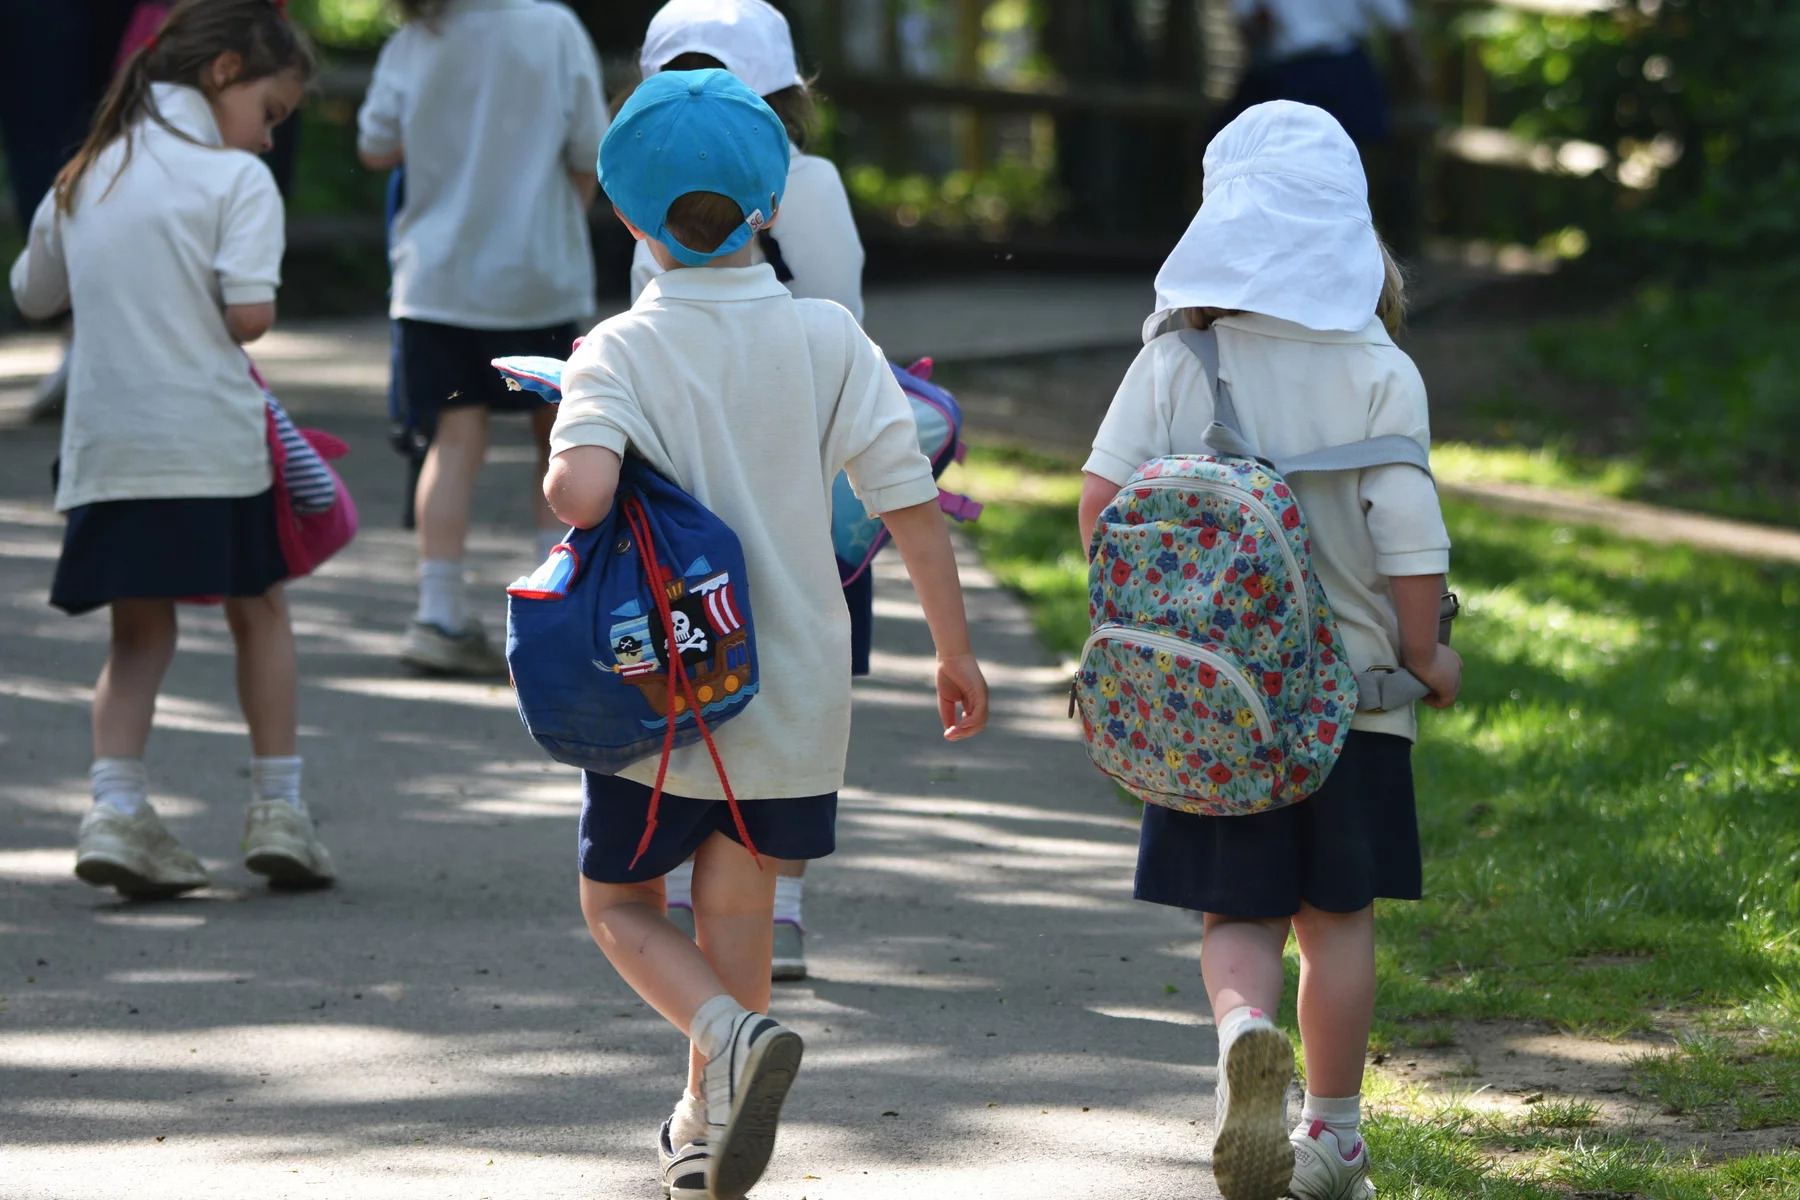 Primary school in the uk, children on a field trip, walking with small backpacks